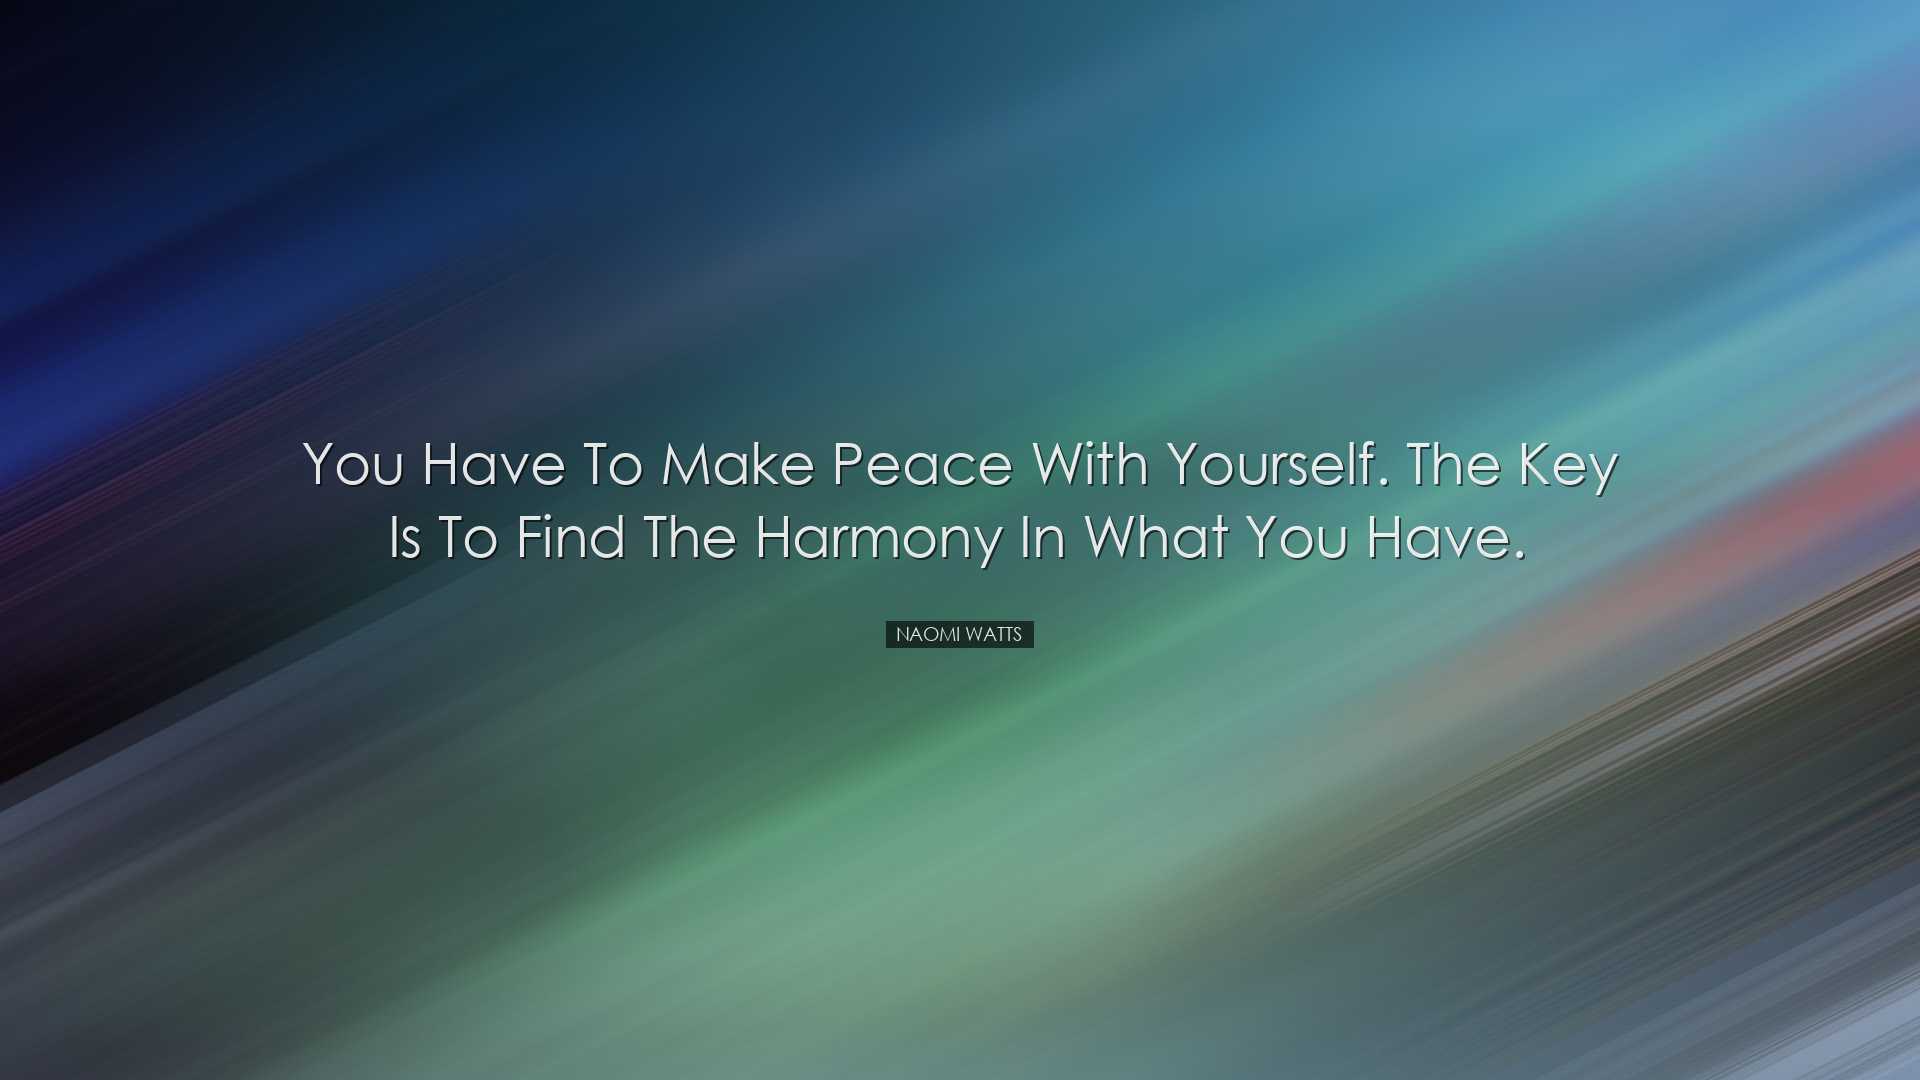 You have to make peace with yourself. The key is to find the harmo